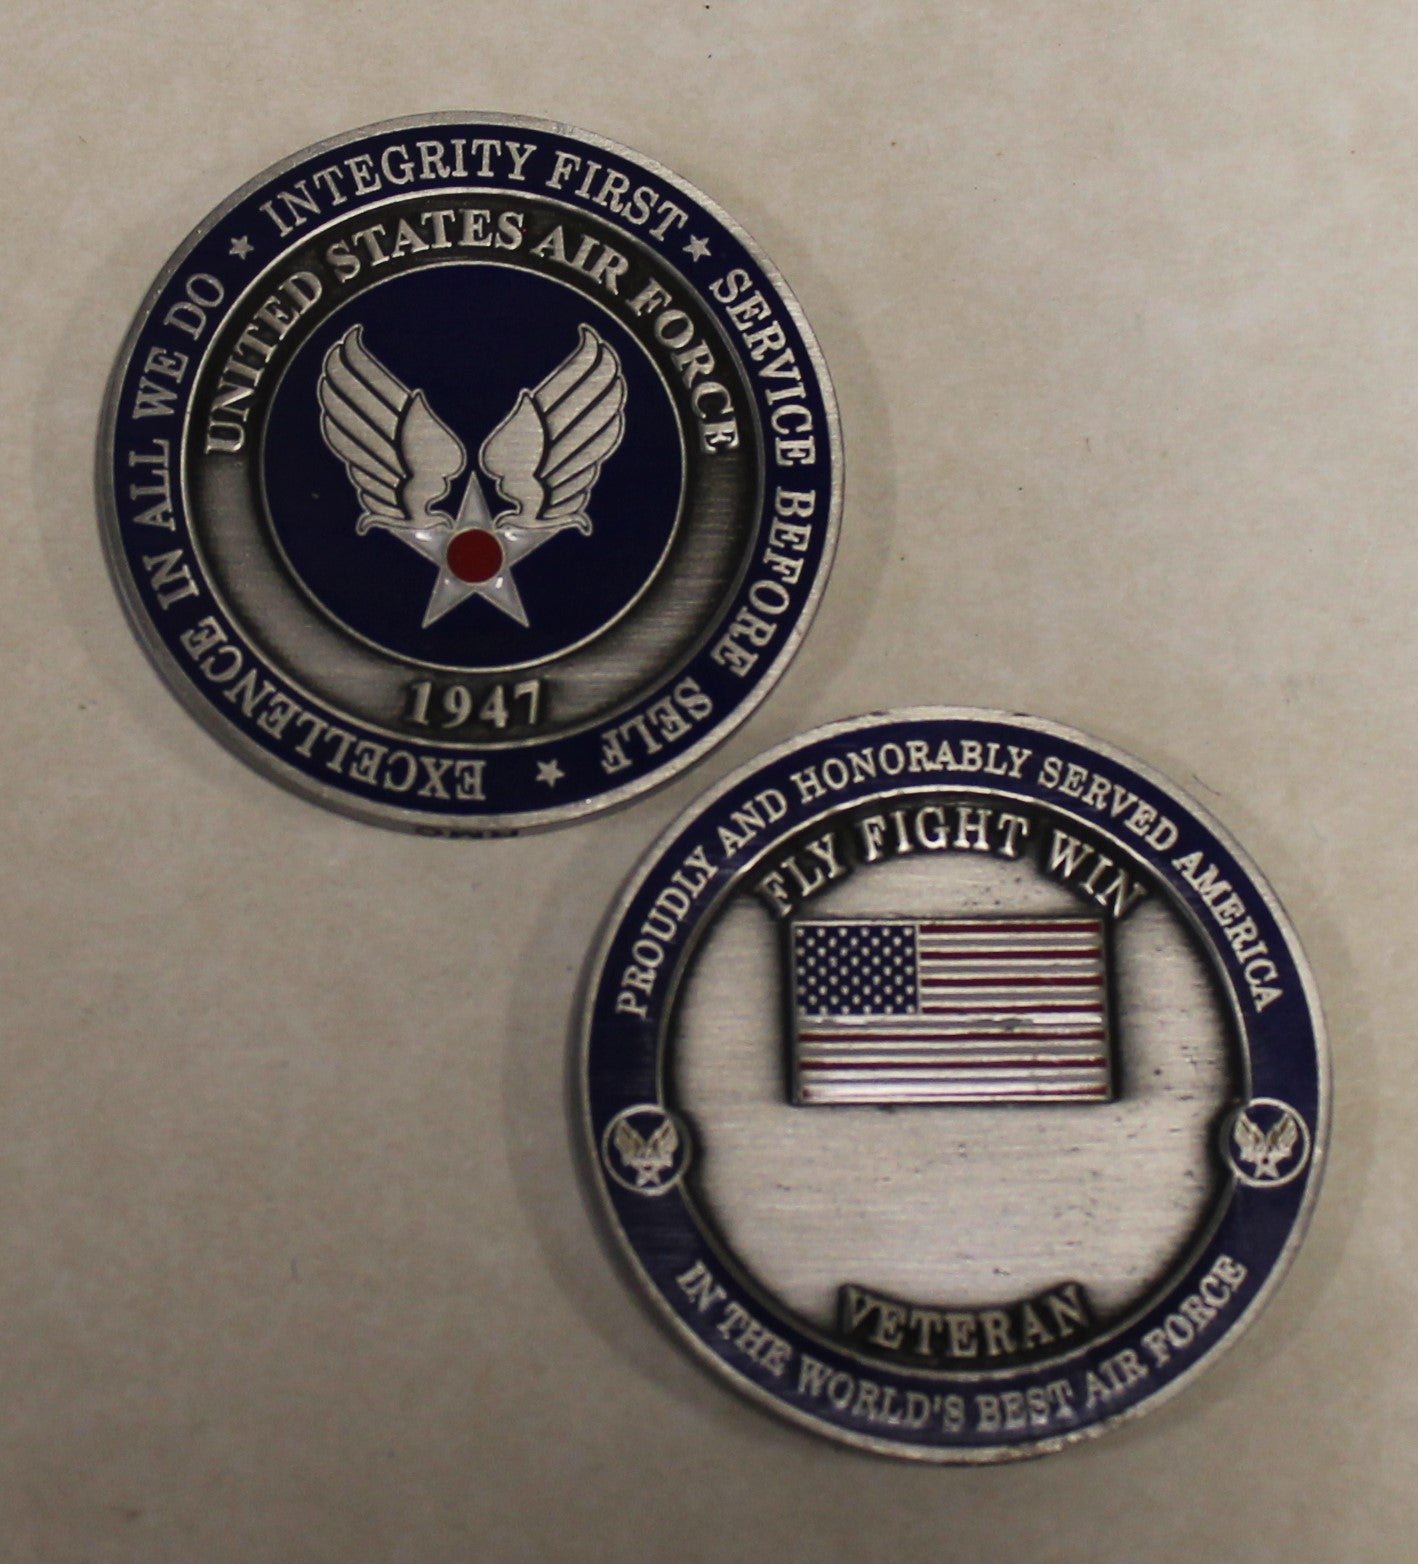 Air Force Basic Training Challenge Coins - Signature Coins